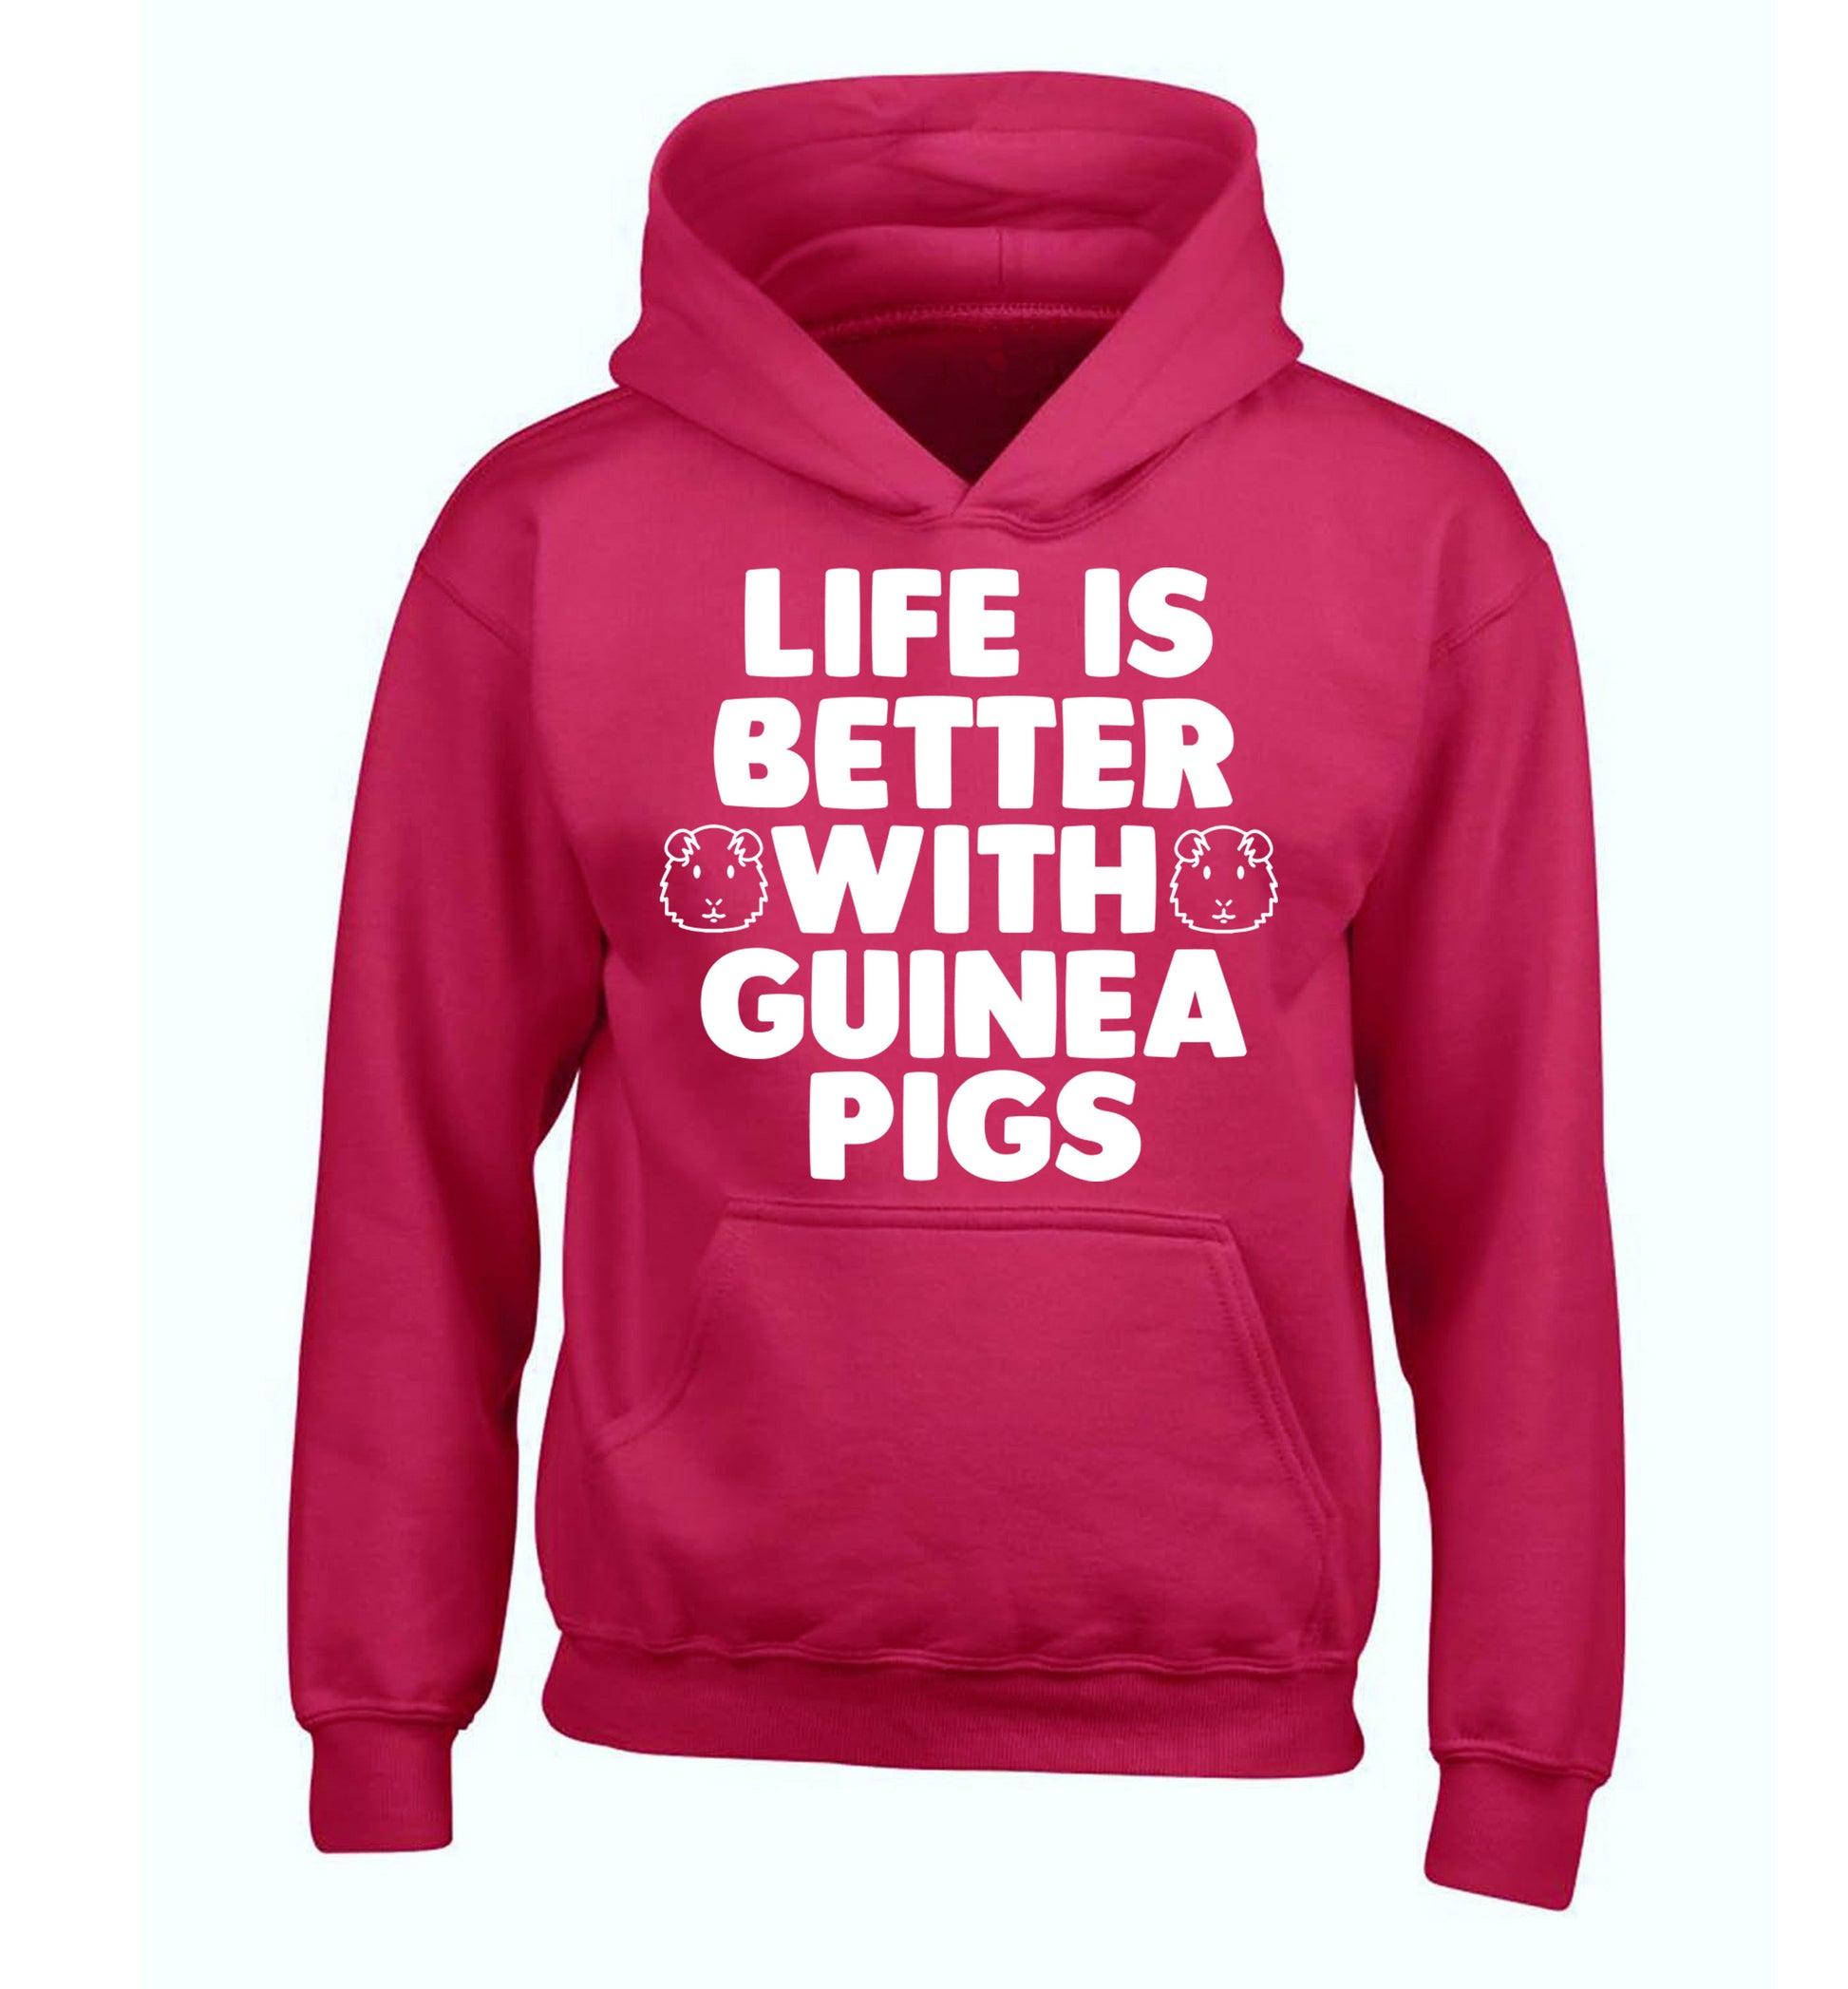 Life is better with guinea pigs children's pink hoodie 12-14 Years